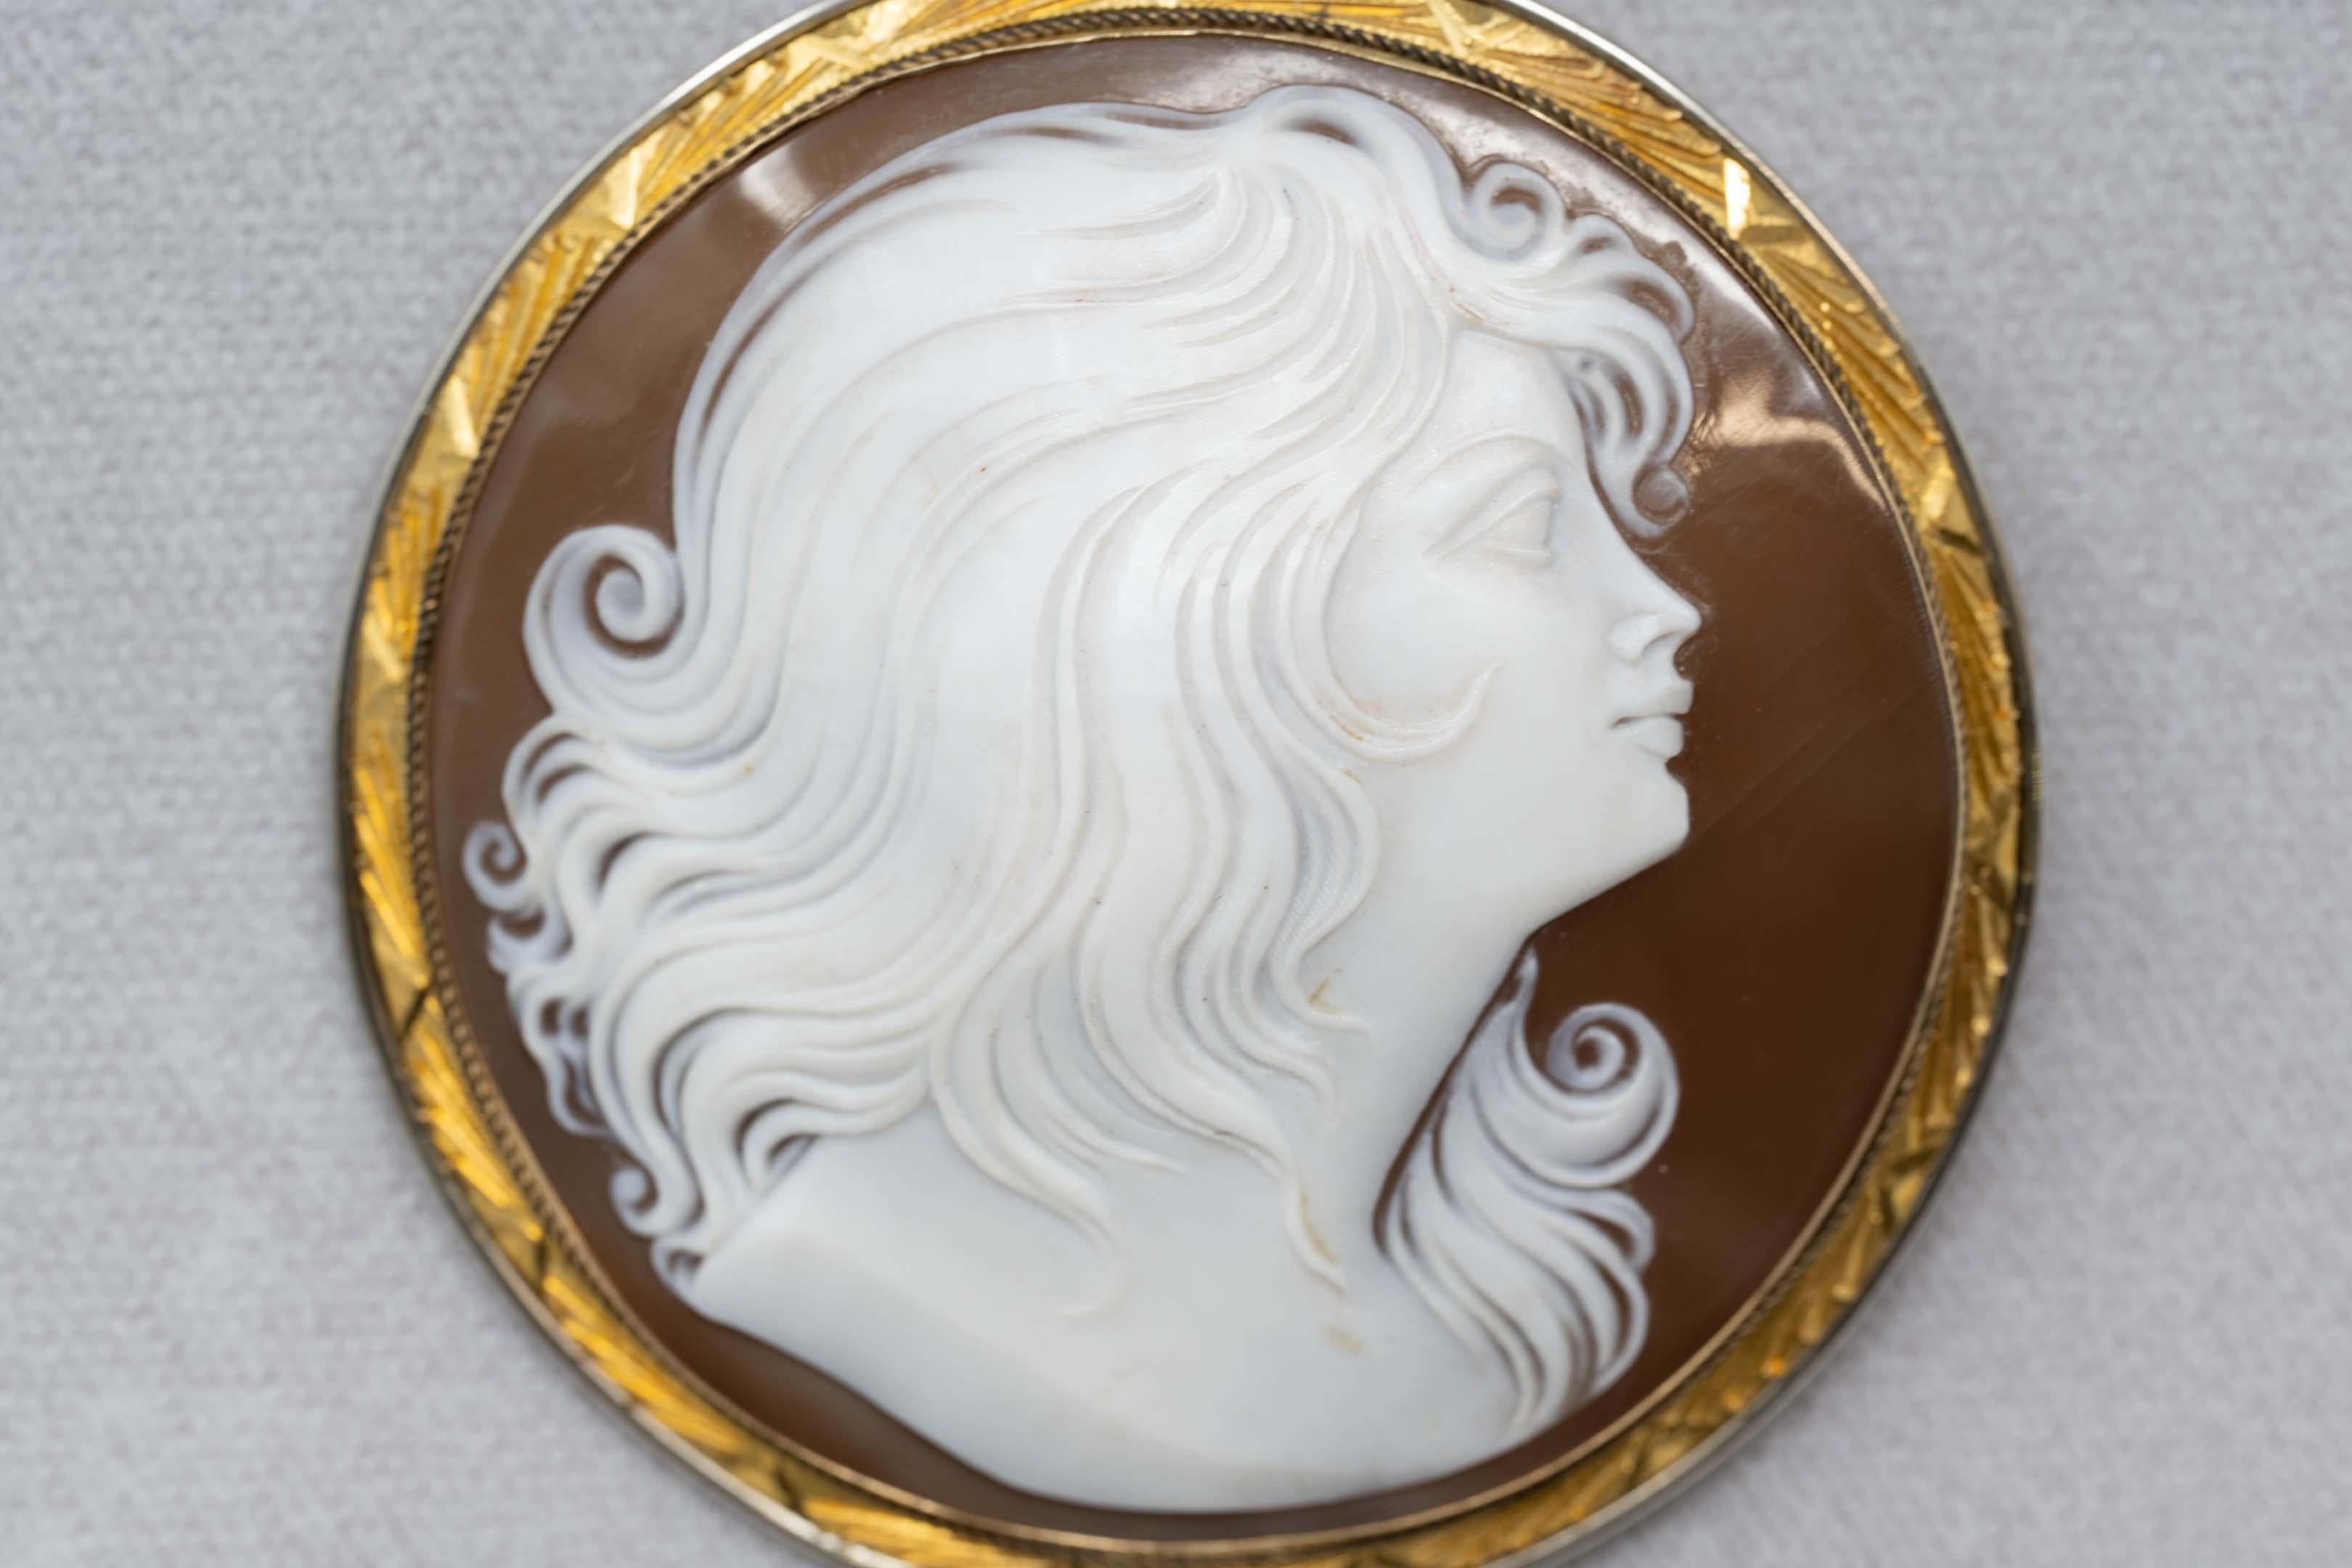 Victorian 14k gold and carved cameo brooch pendant of young woman. Stamped 14k on the back, measures 55 mm in diameter. Weighs 23.5 grams.
